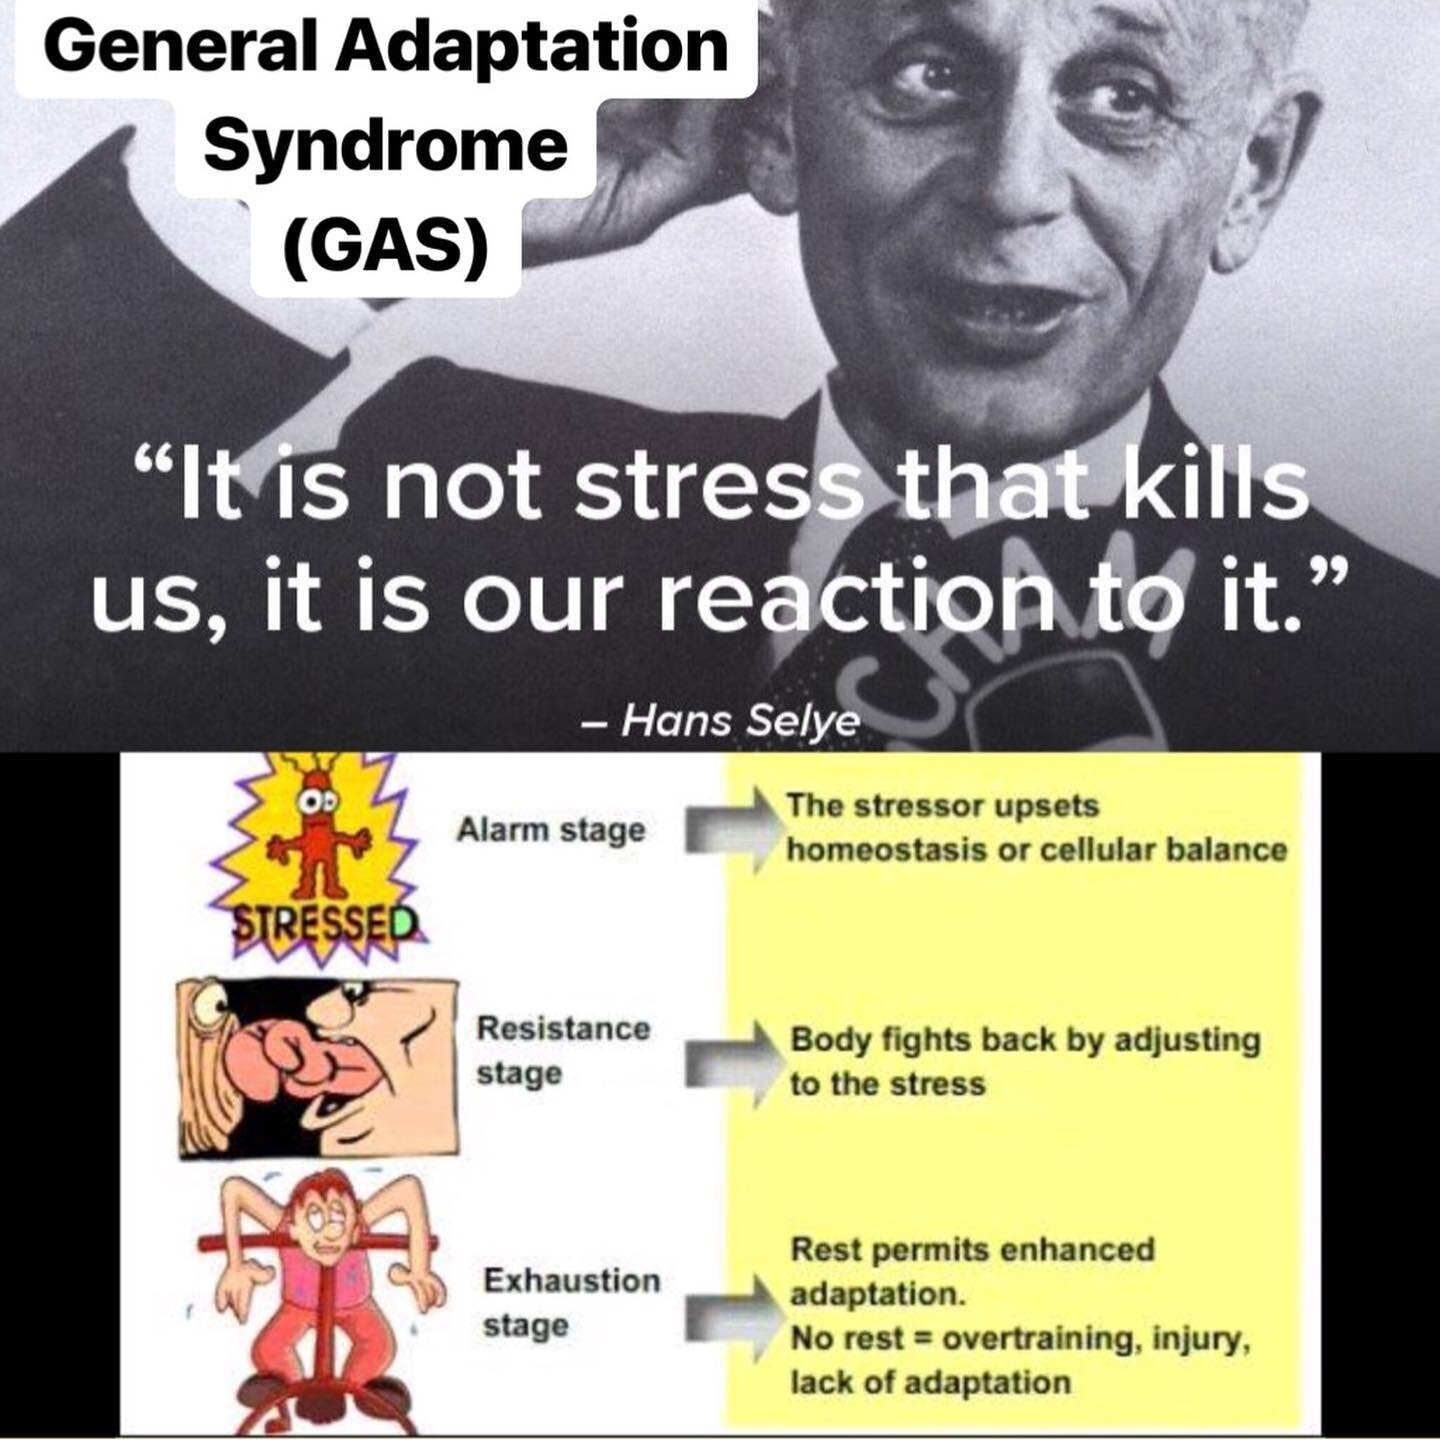 In 1956, Hans Selye introduced General Adaptation Syndrome(GAS), which states that systems in the body will adapt to changes that may be placed upon them.  This is an important part of progressive overload that allows us to set up training cycles the